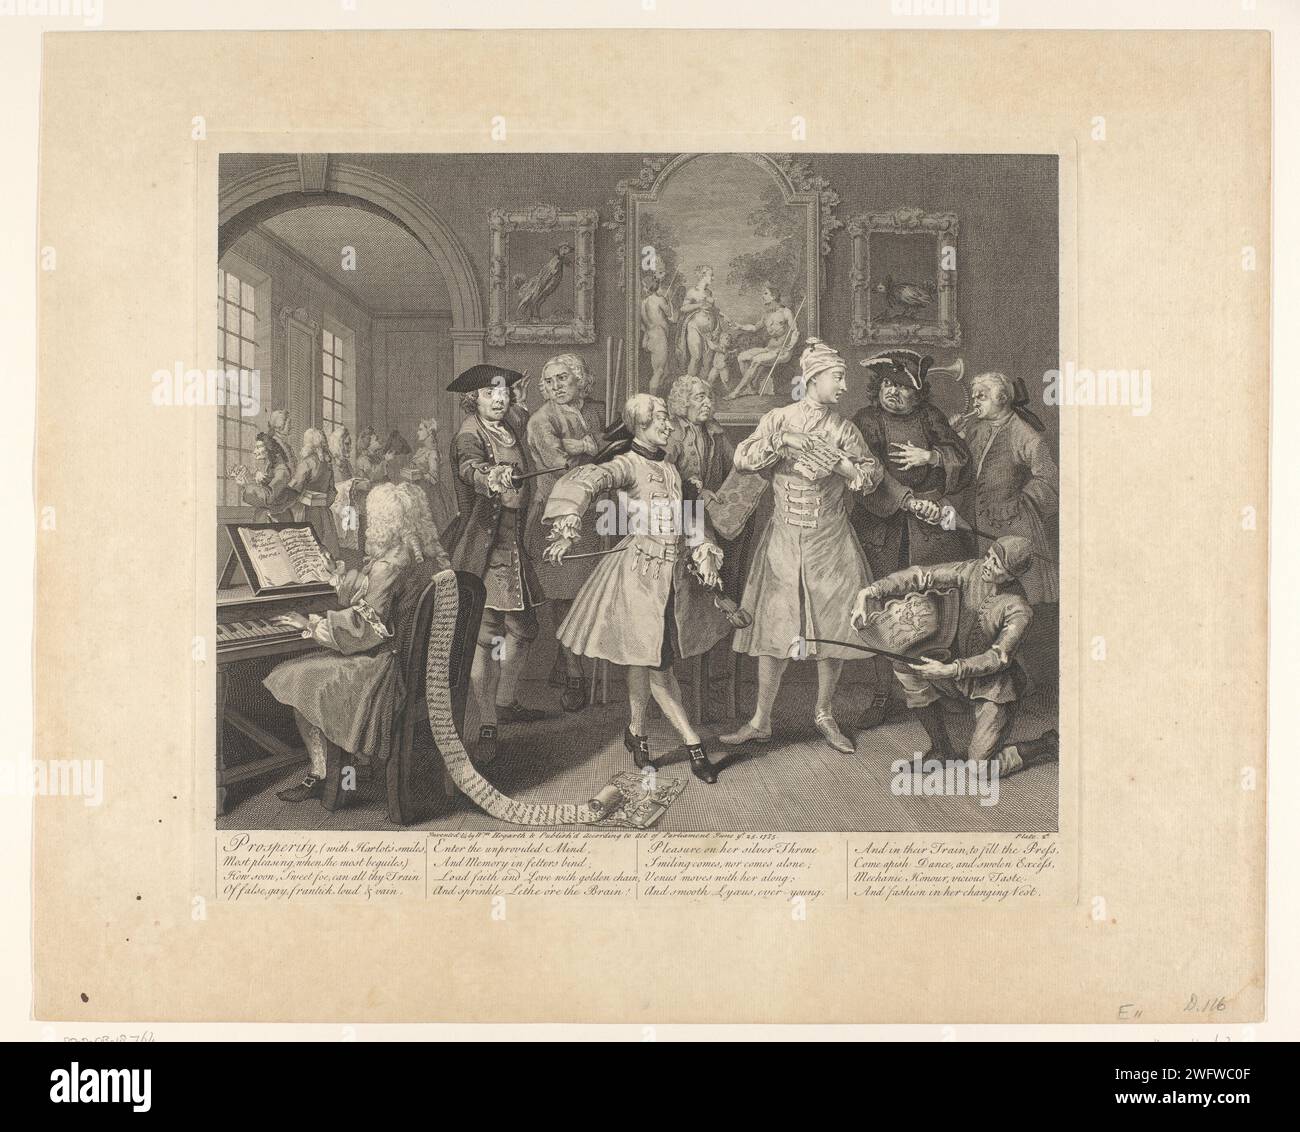 Tom Rakewell surrounded by people in the morning, William Hogarth, 1735 print Text in English in the lower margin. Tom is surrounded by men dressed in expensive costumes that offer their services: a musician on a harpsichord, possibly George Frederik Händel, a fencer, possibly Dubois, a Quarterstaff instructor, possibly James Figg, a dance master with violin, possibly John Essex, a Gardener, possibly Charles Bridgeman, an ex-soldier who offers himself as a bodyguard and a hunting horn blower from a fox hunting club. At the bottom right a jockey squat with a trophy stating that he has won the E Stock Photo